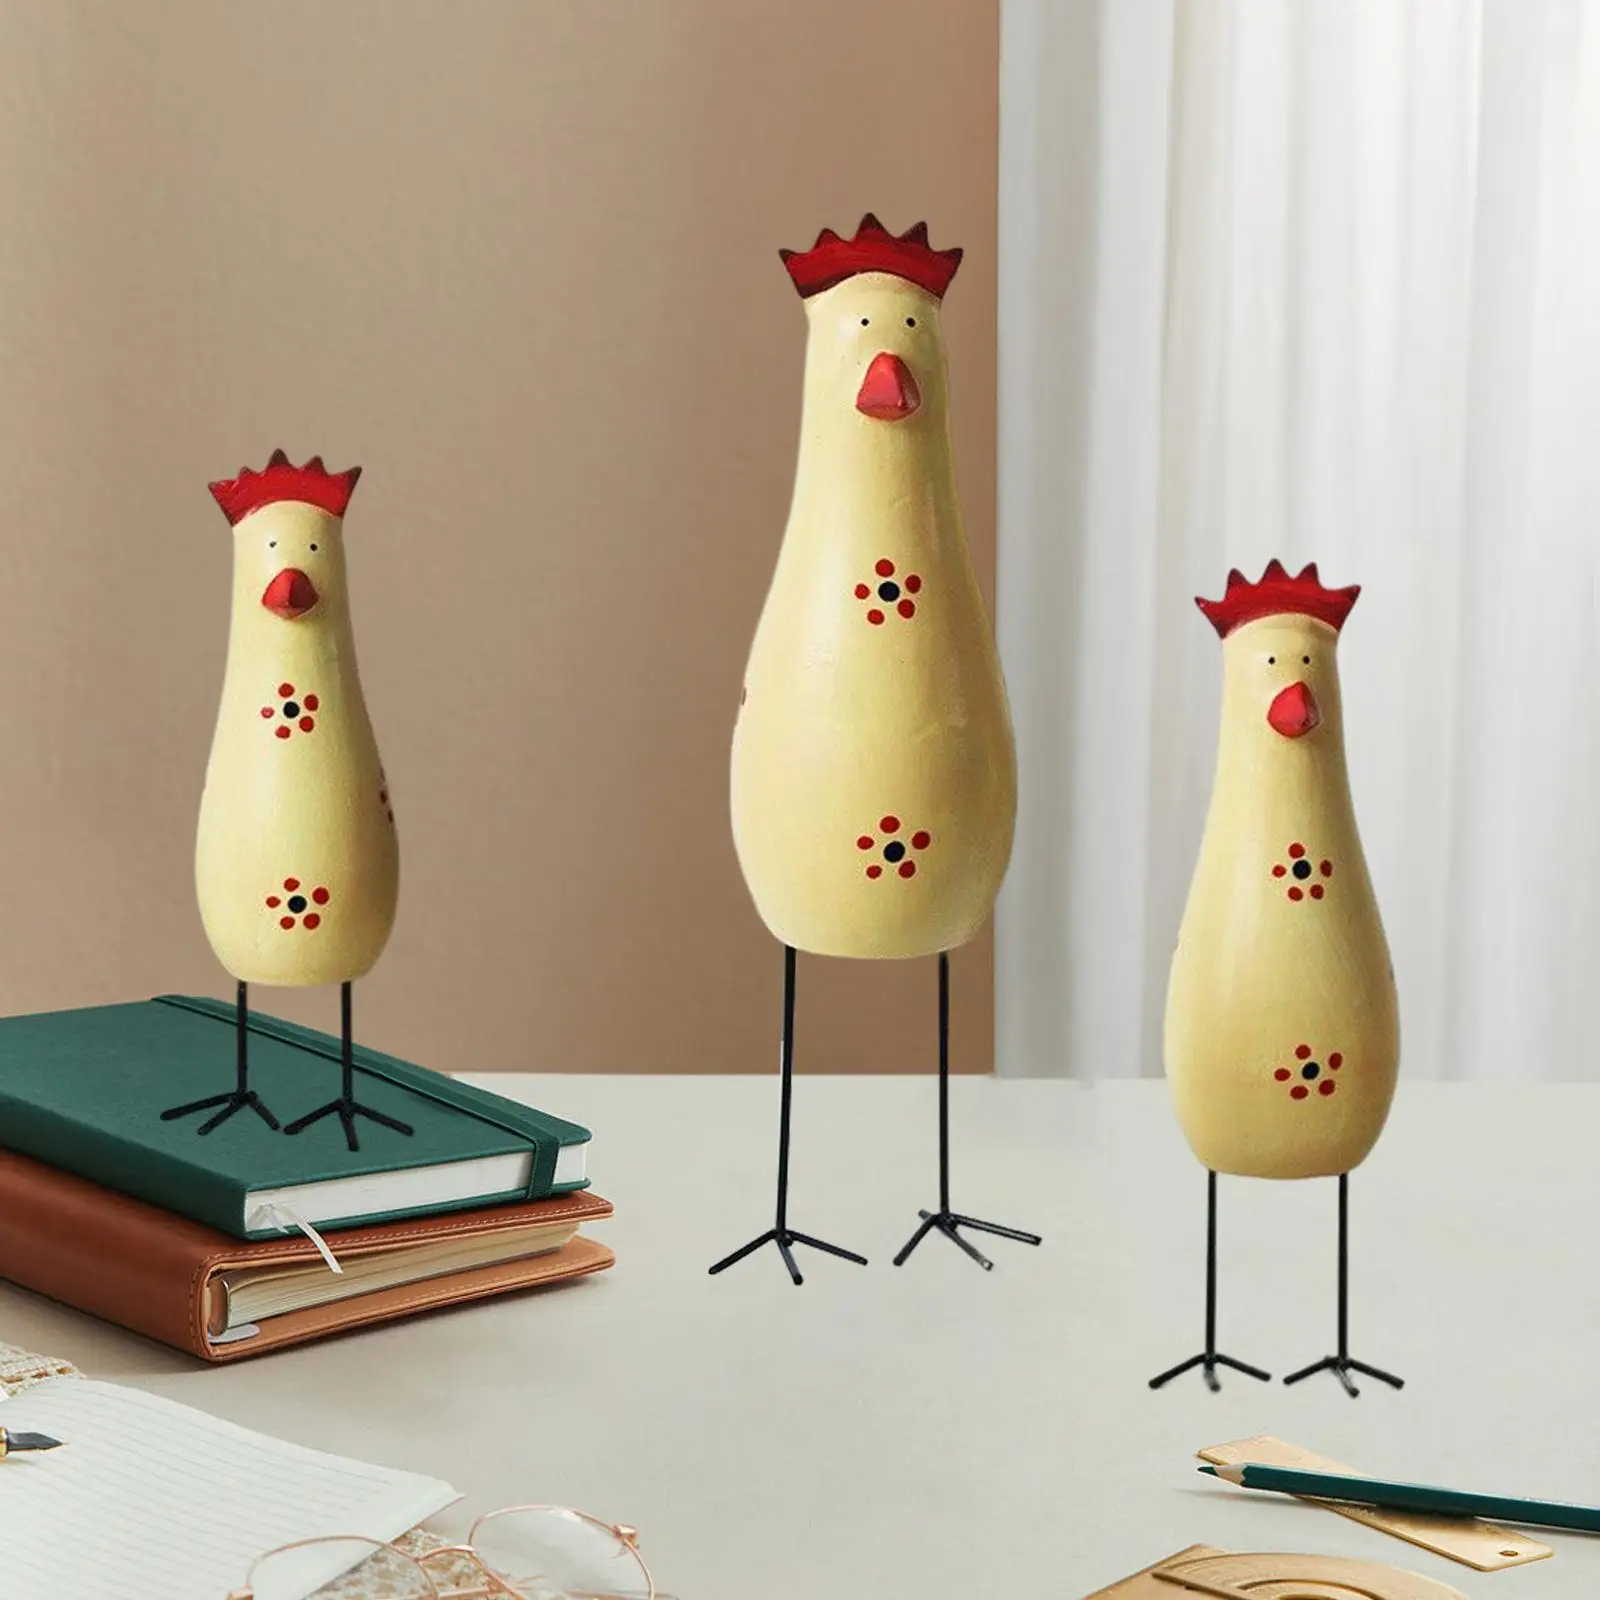 

3x Wood Carving Chicken Statues Hen Sculptures Decoration Rooster Figurines